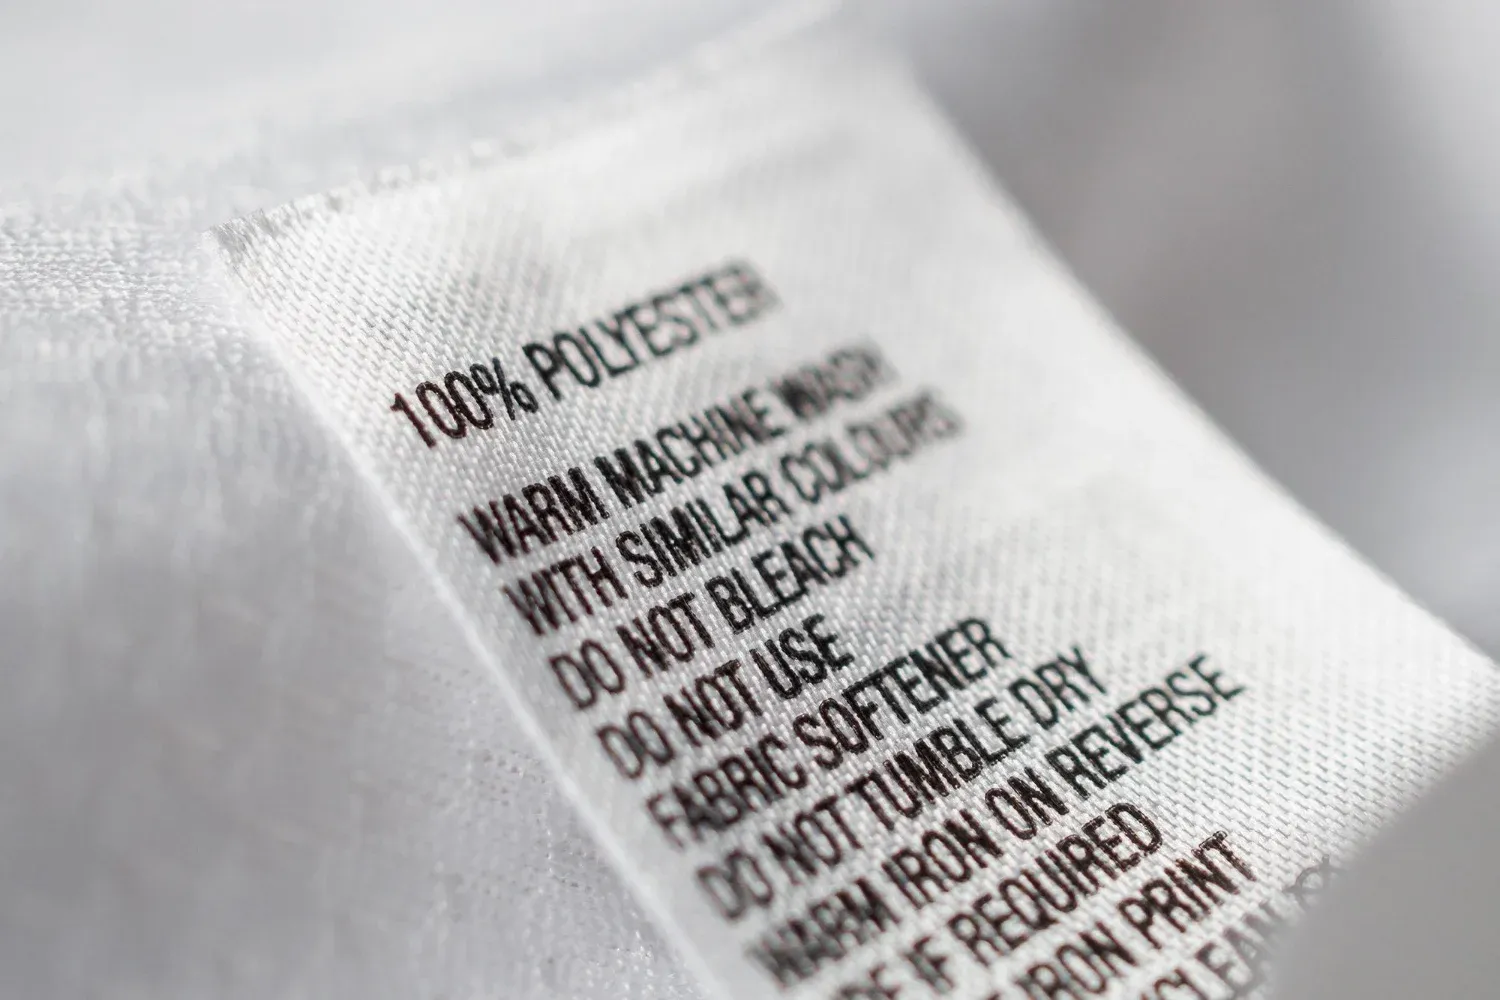 polyester-fabric-clothing-label-with-laundry-instructions